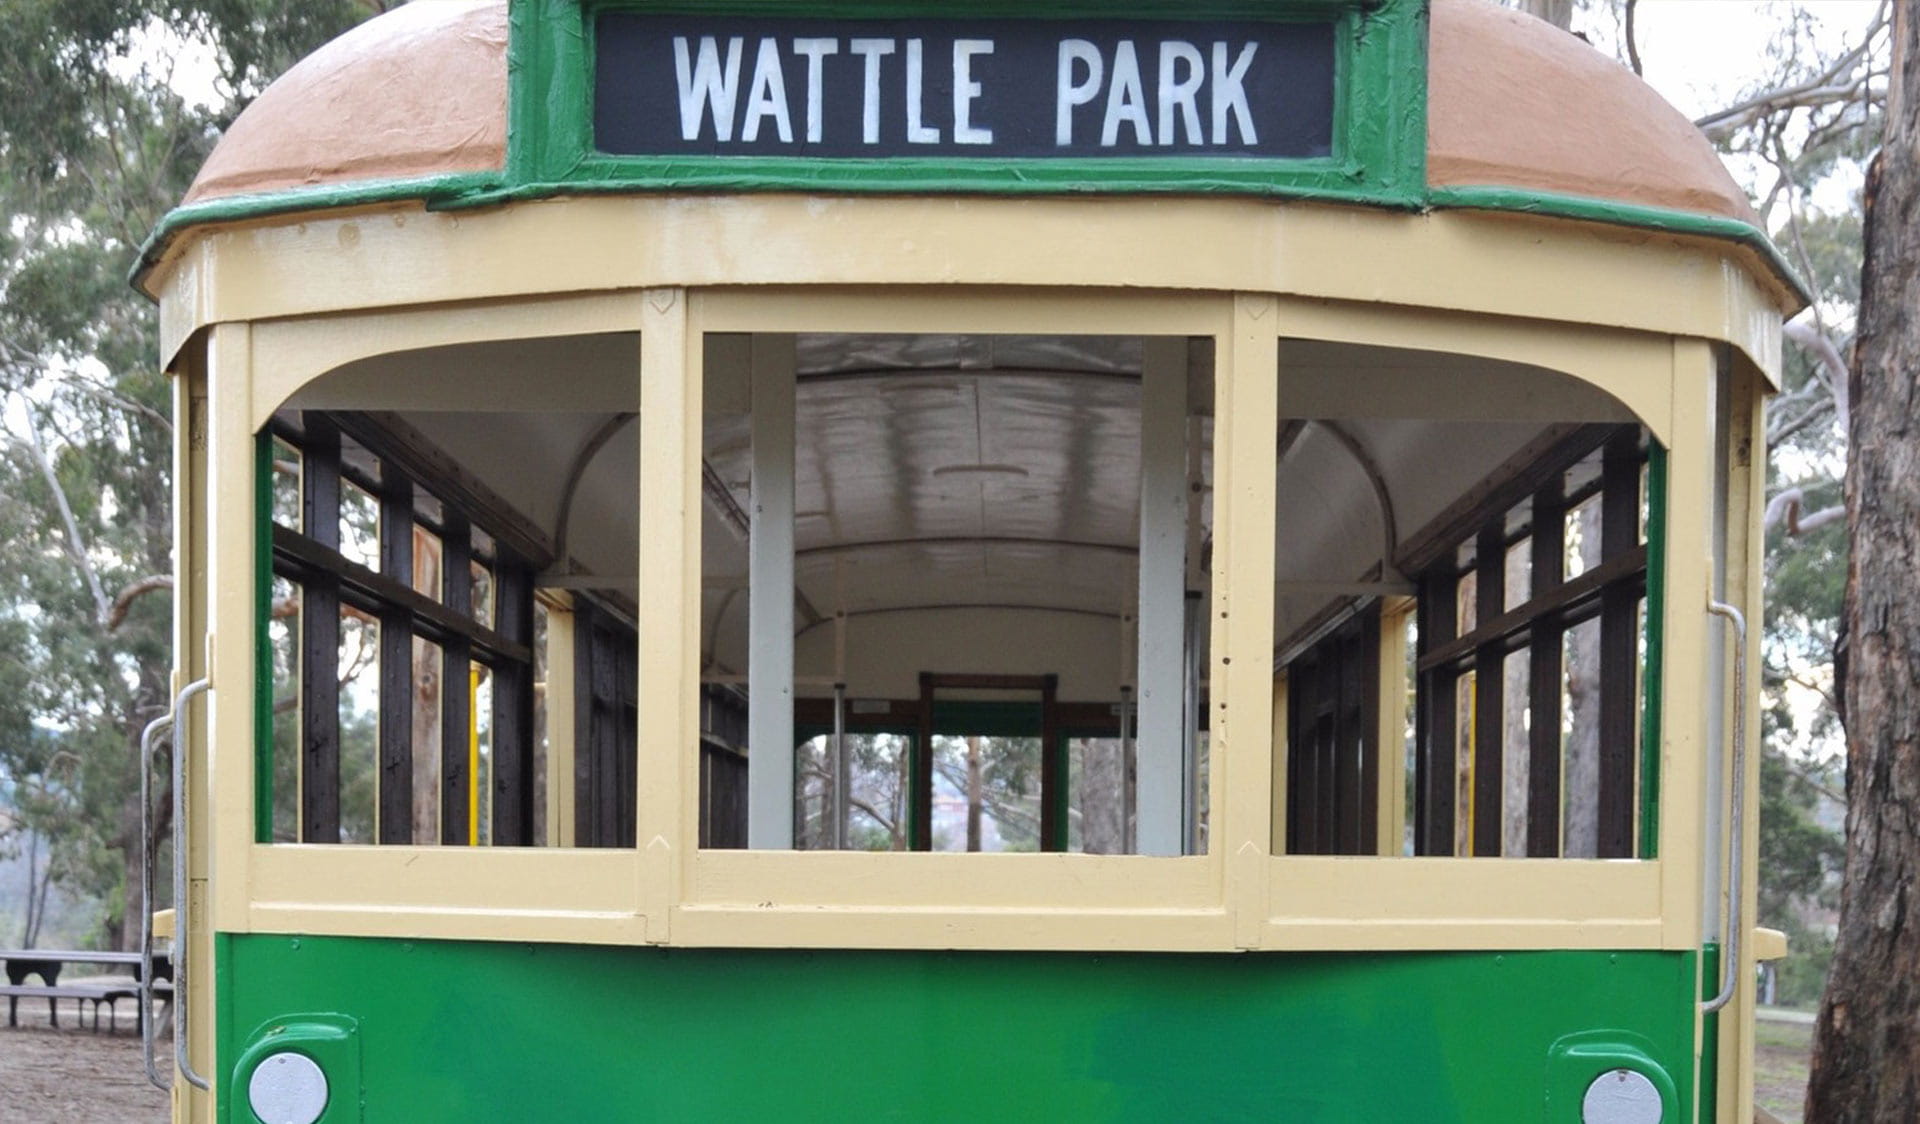 The Wattle Park Tram - a feature of the park.